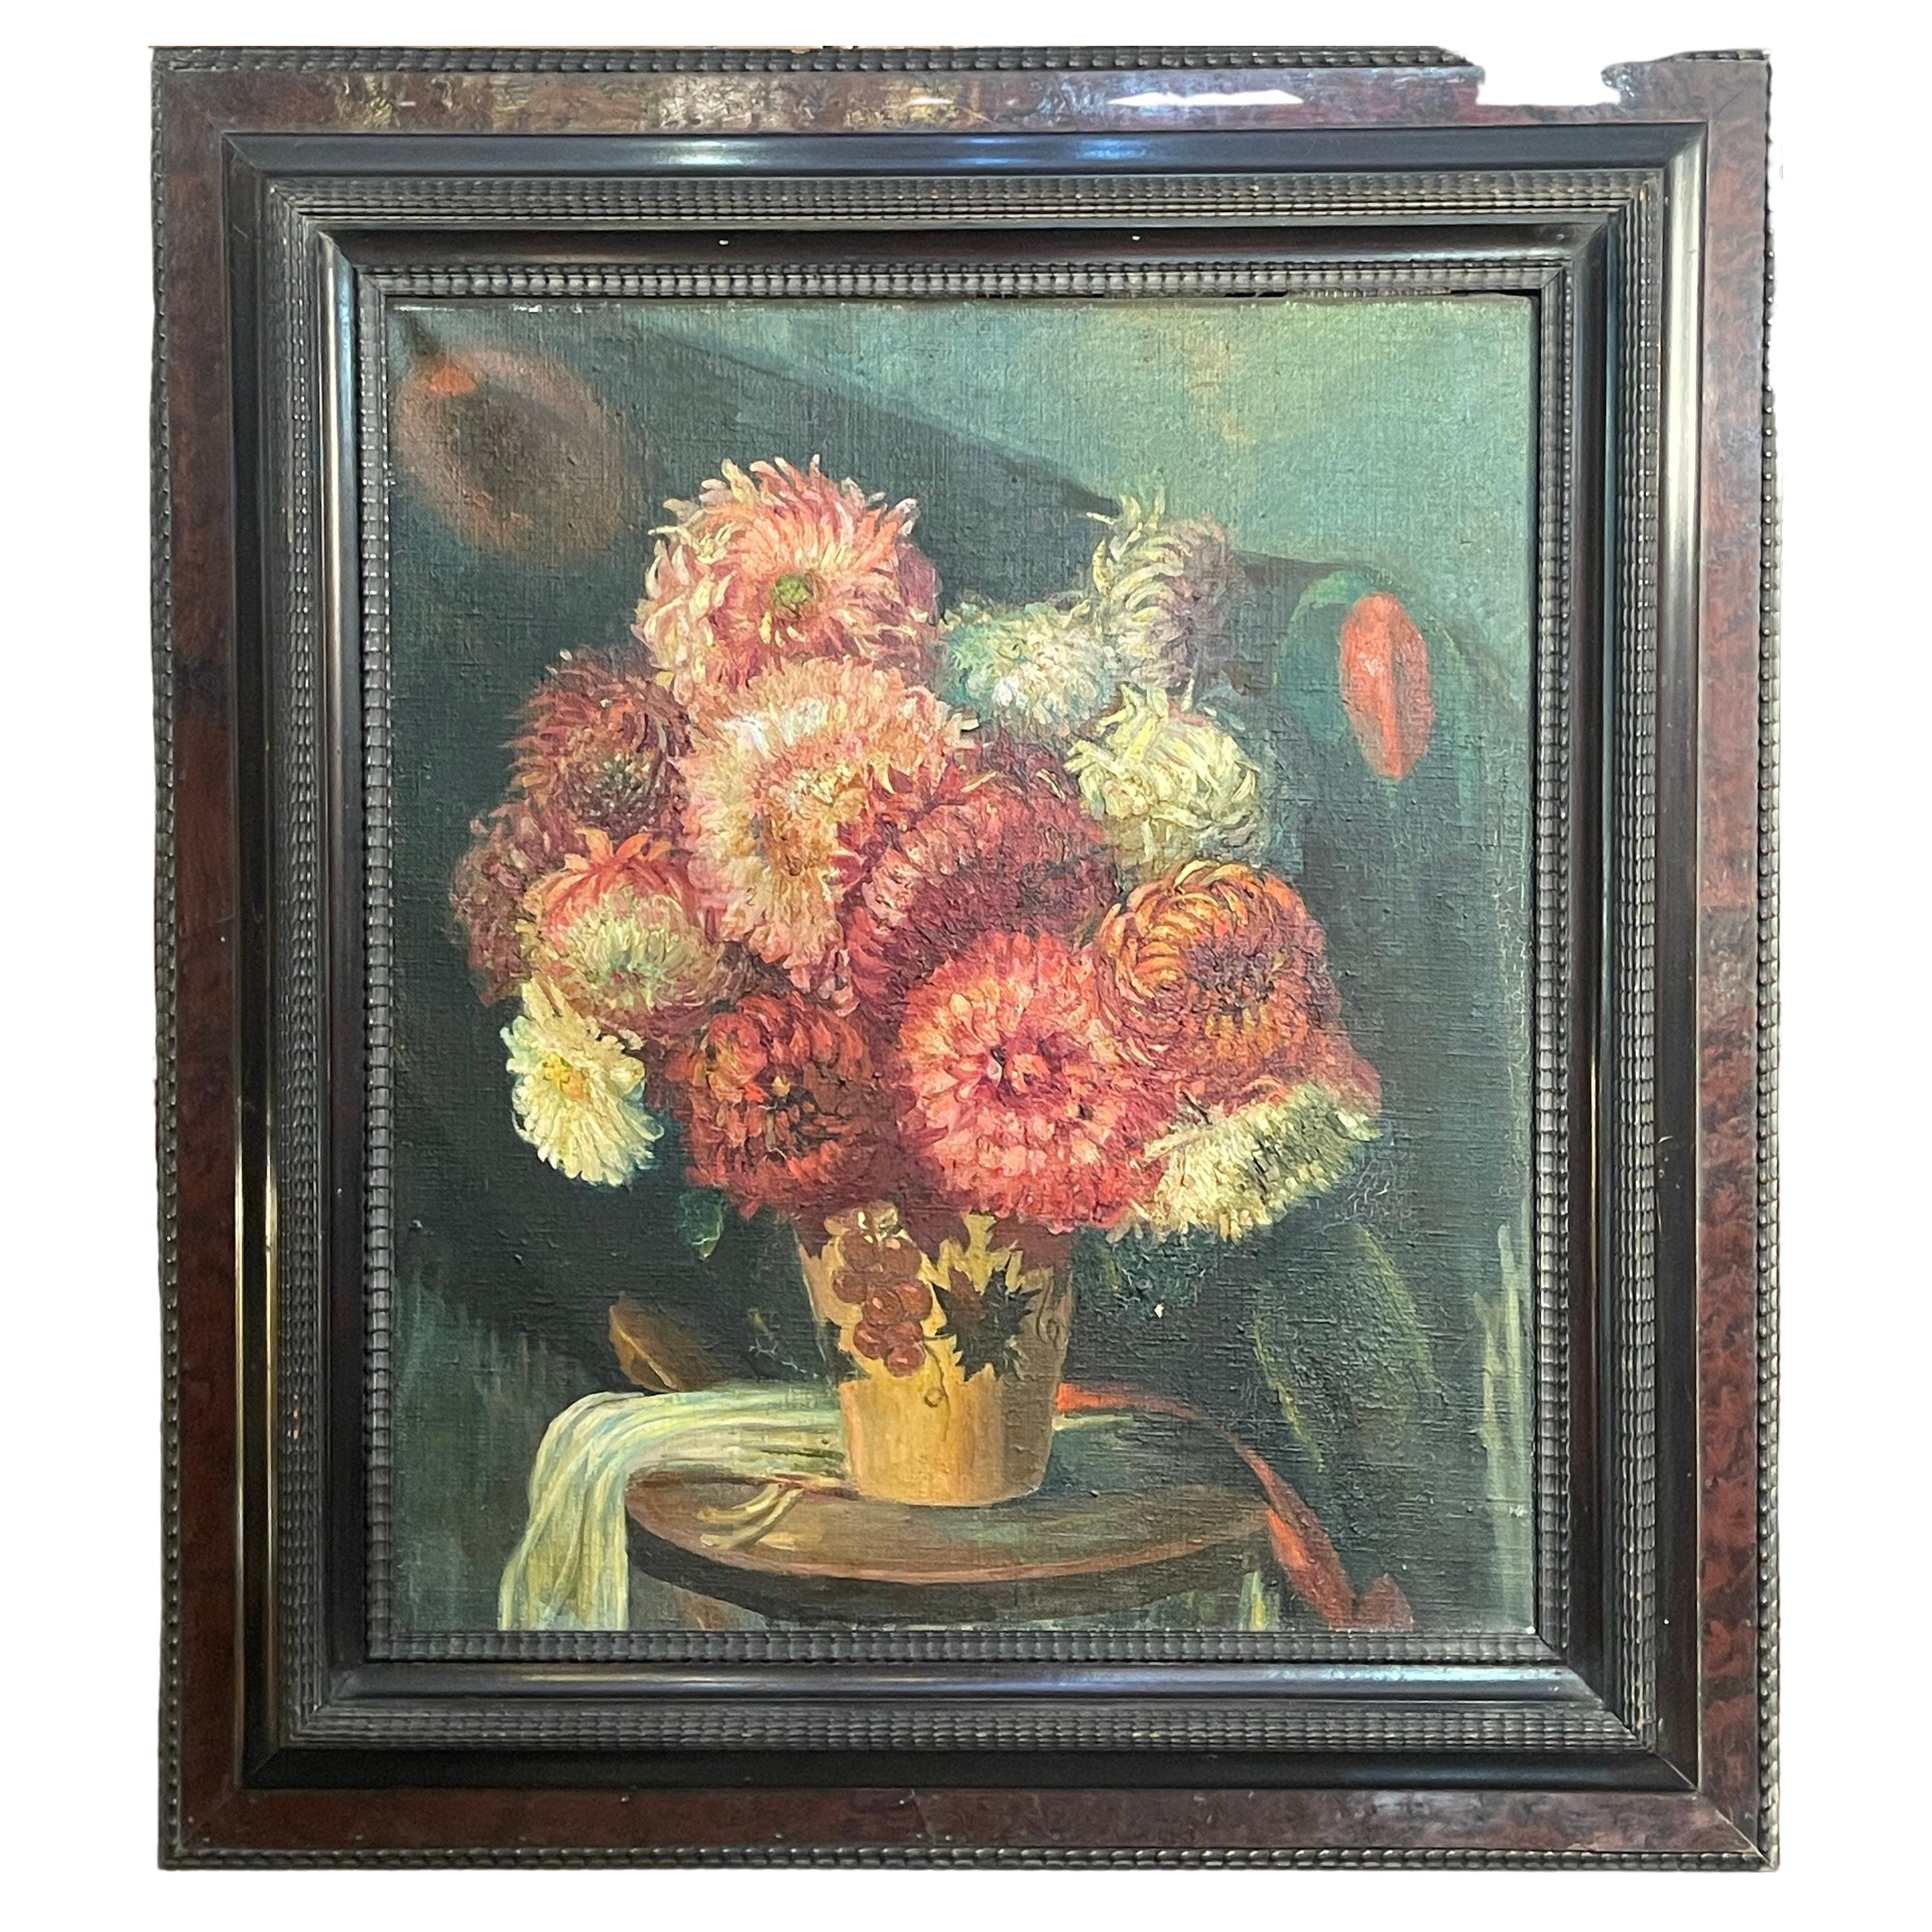 Oil painting on canvas, late 19th century, flowers